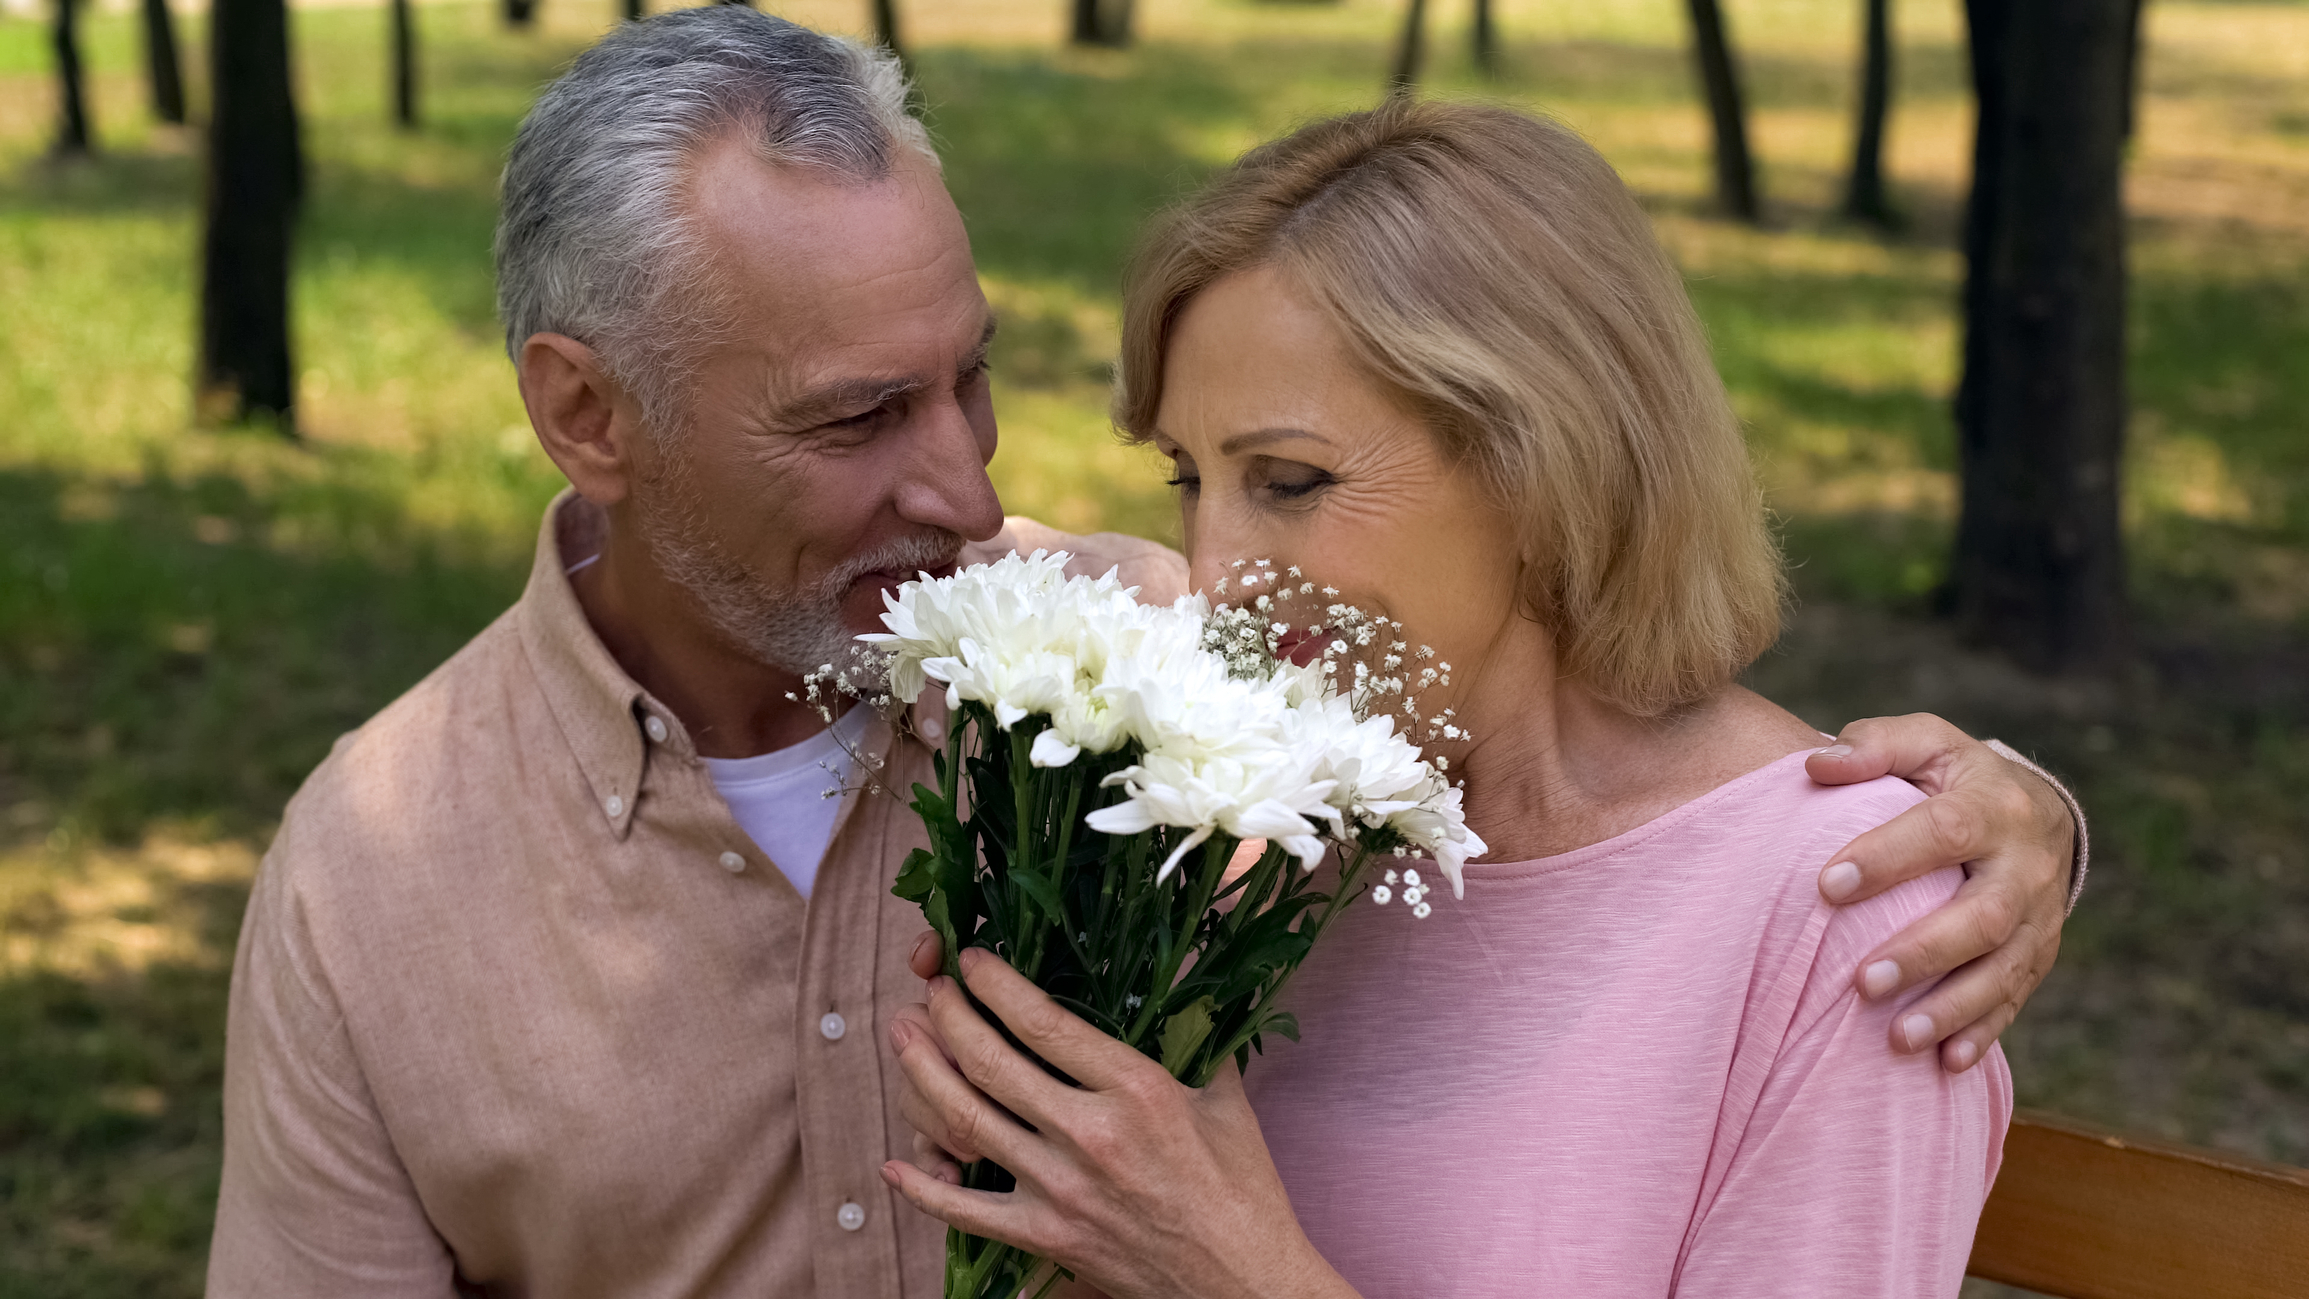 Man with his arm around is date after giving her flowers as a gesture of his true love.